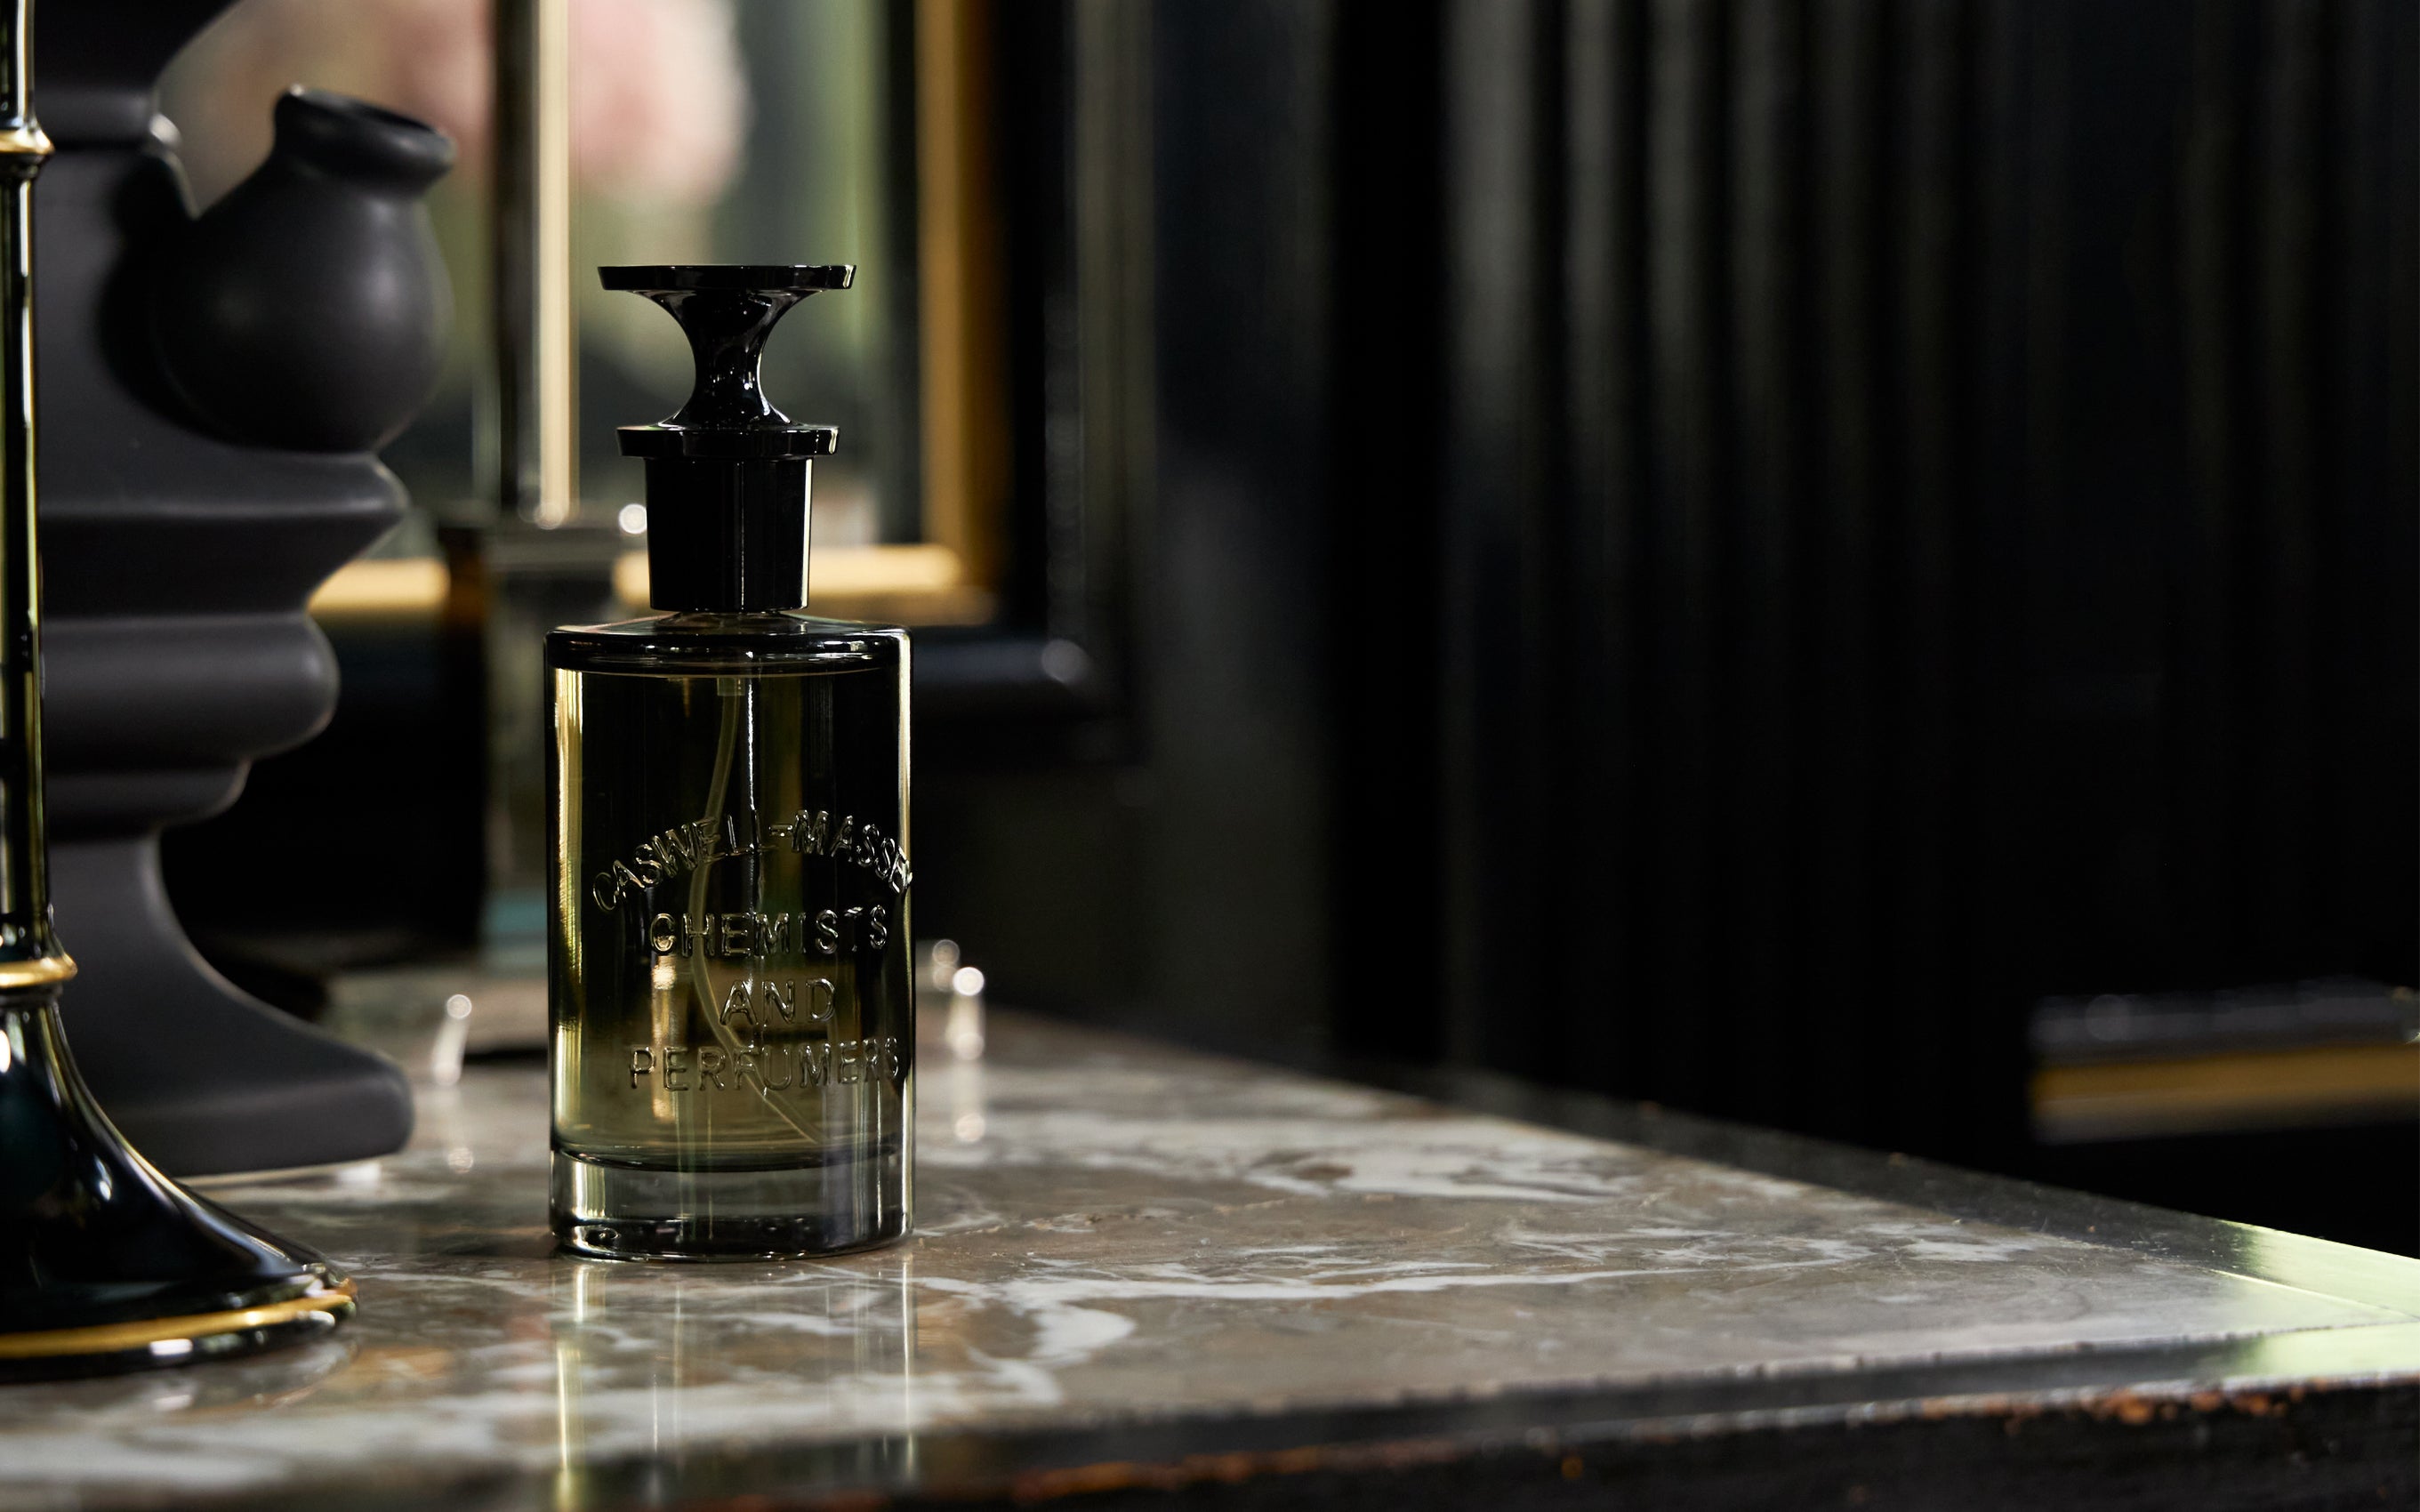 Caswell-Massey Oaire Eau de Parfum, fragrance bottle with black cap and smokey bottle sitting on dark marble tabletop